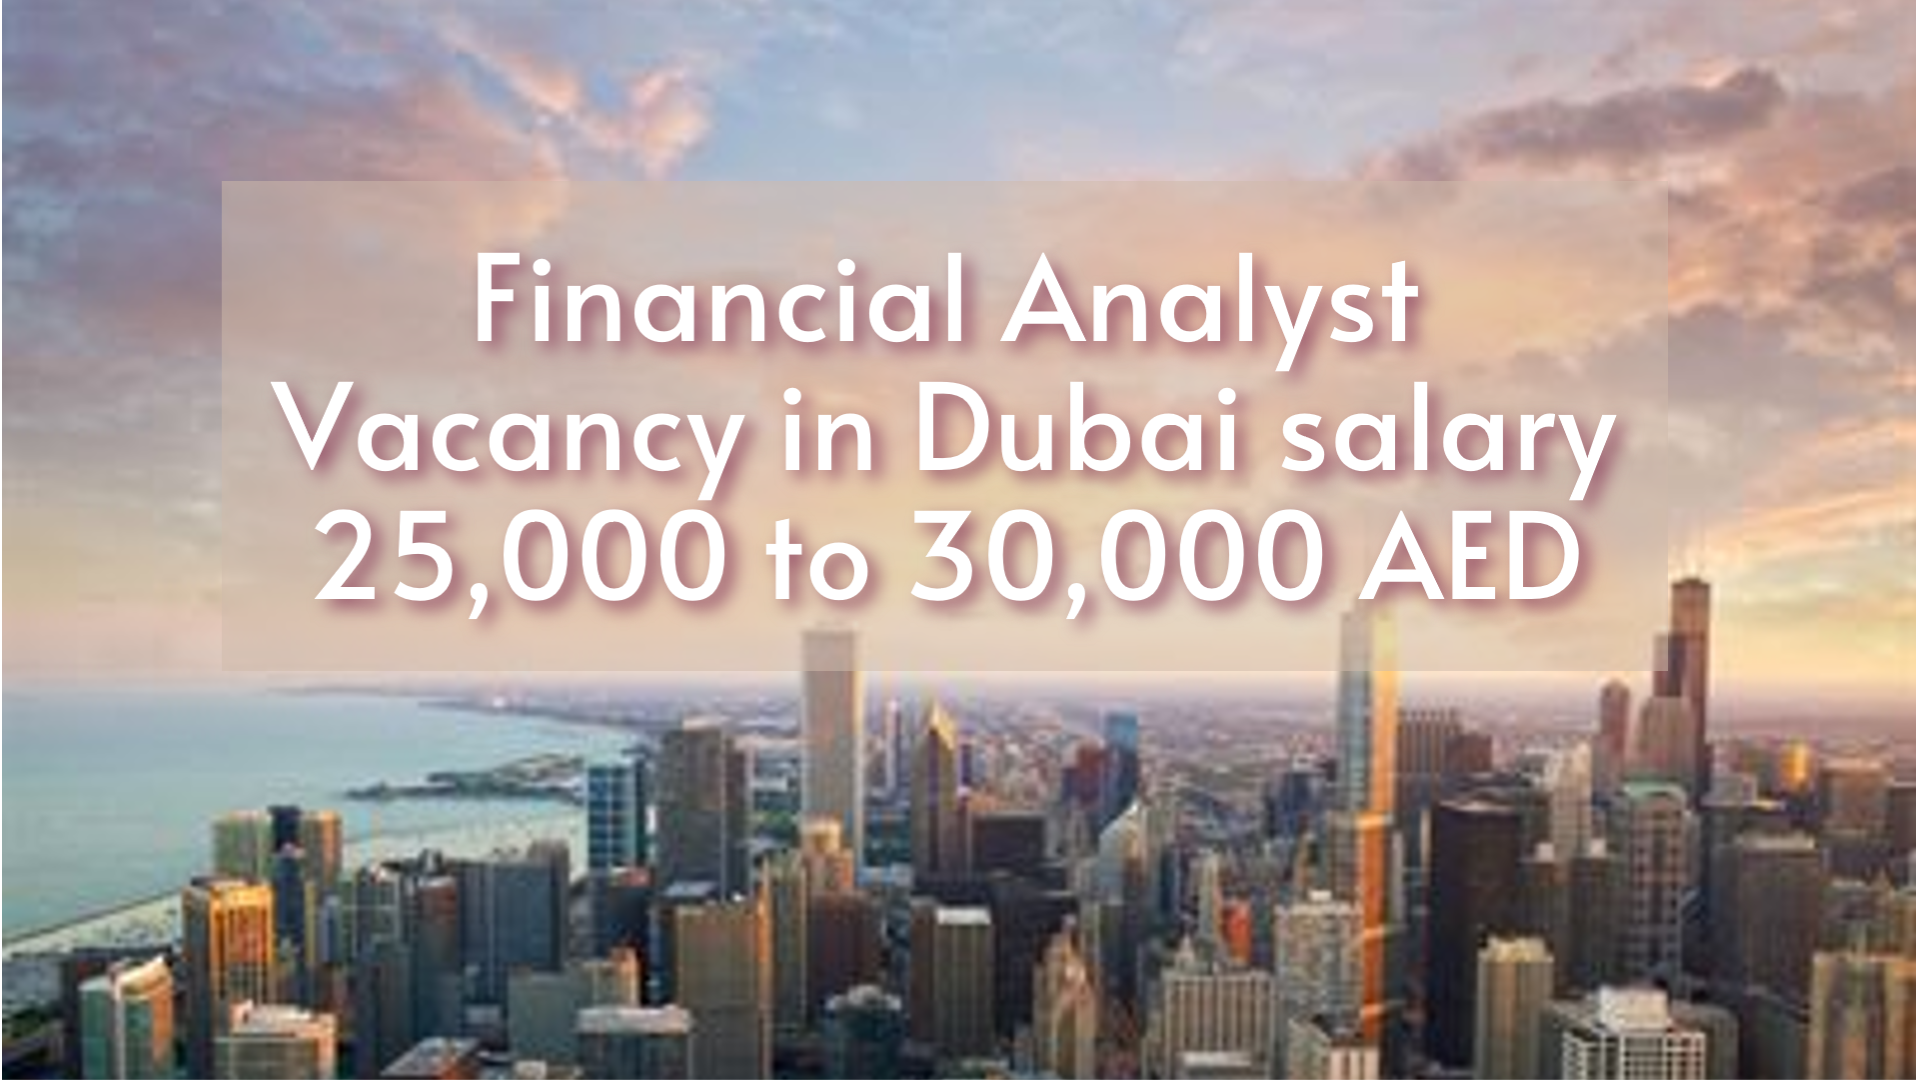 Financial Analyst vacancy in Dubai with salary 25,000 to 30,000 AED